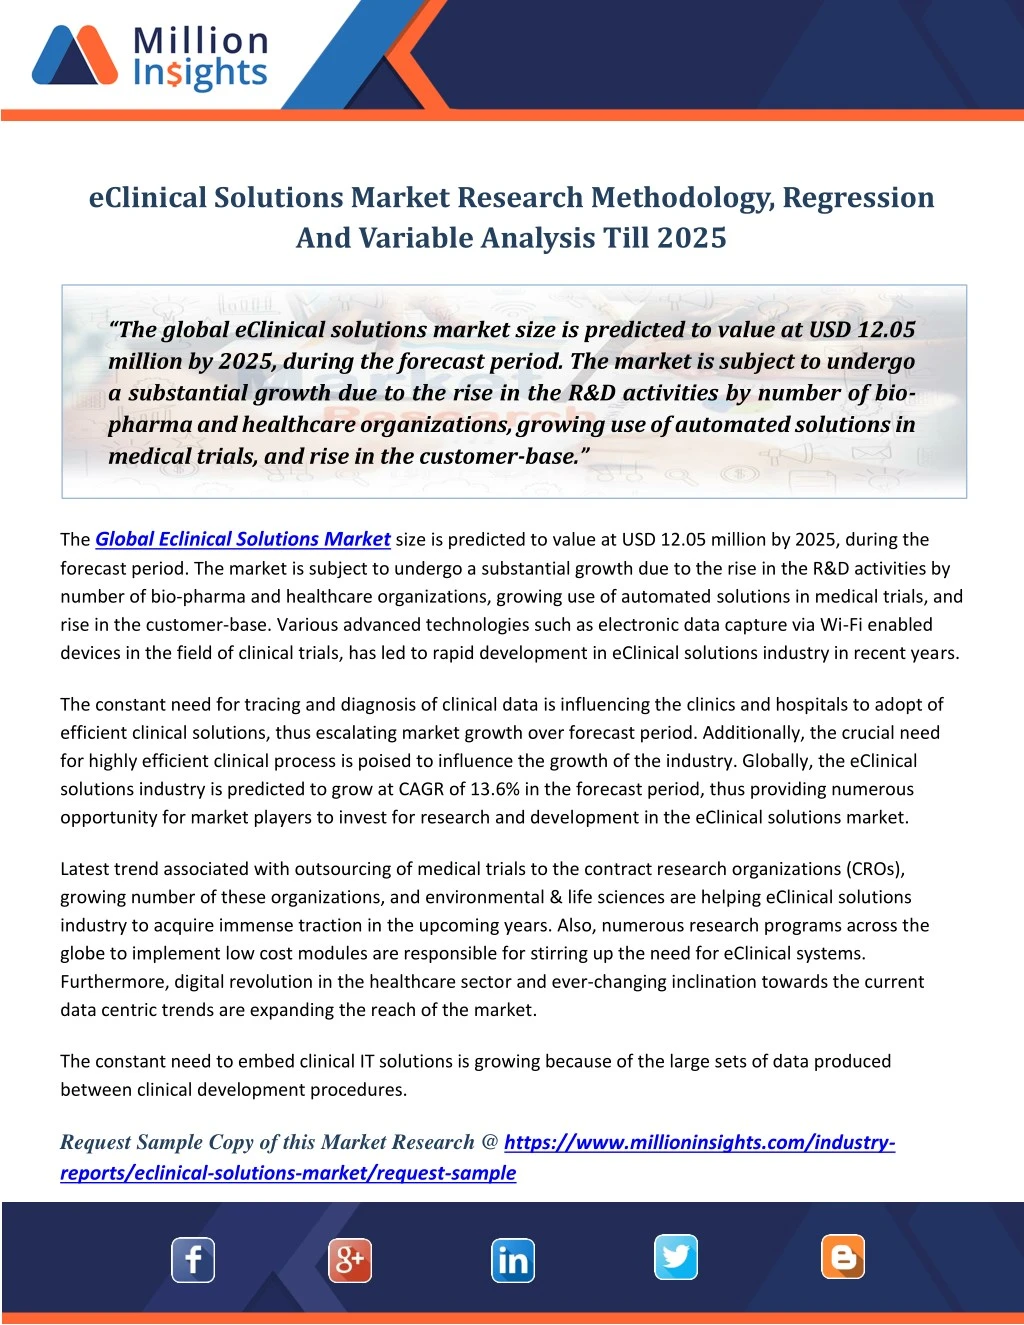 eclinical solutions market research methodology